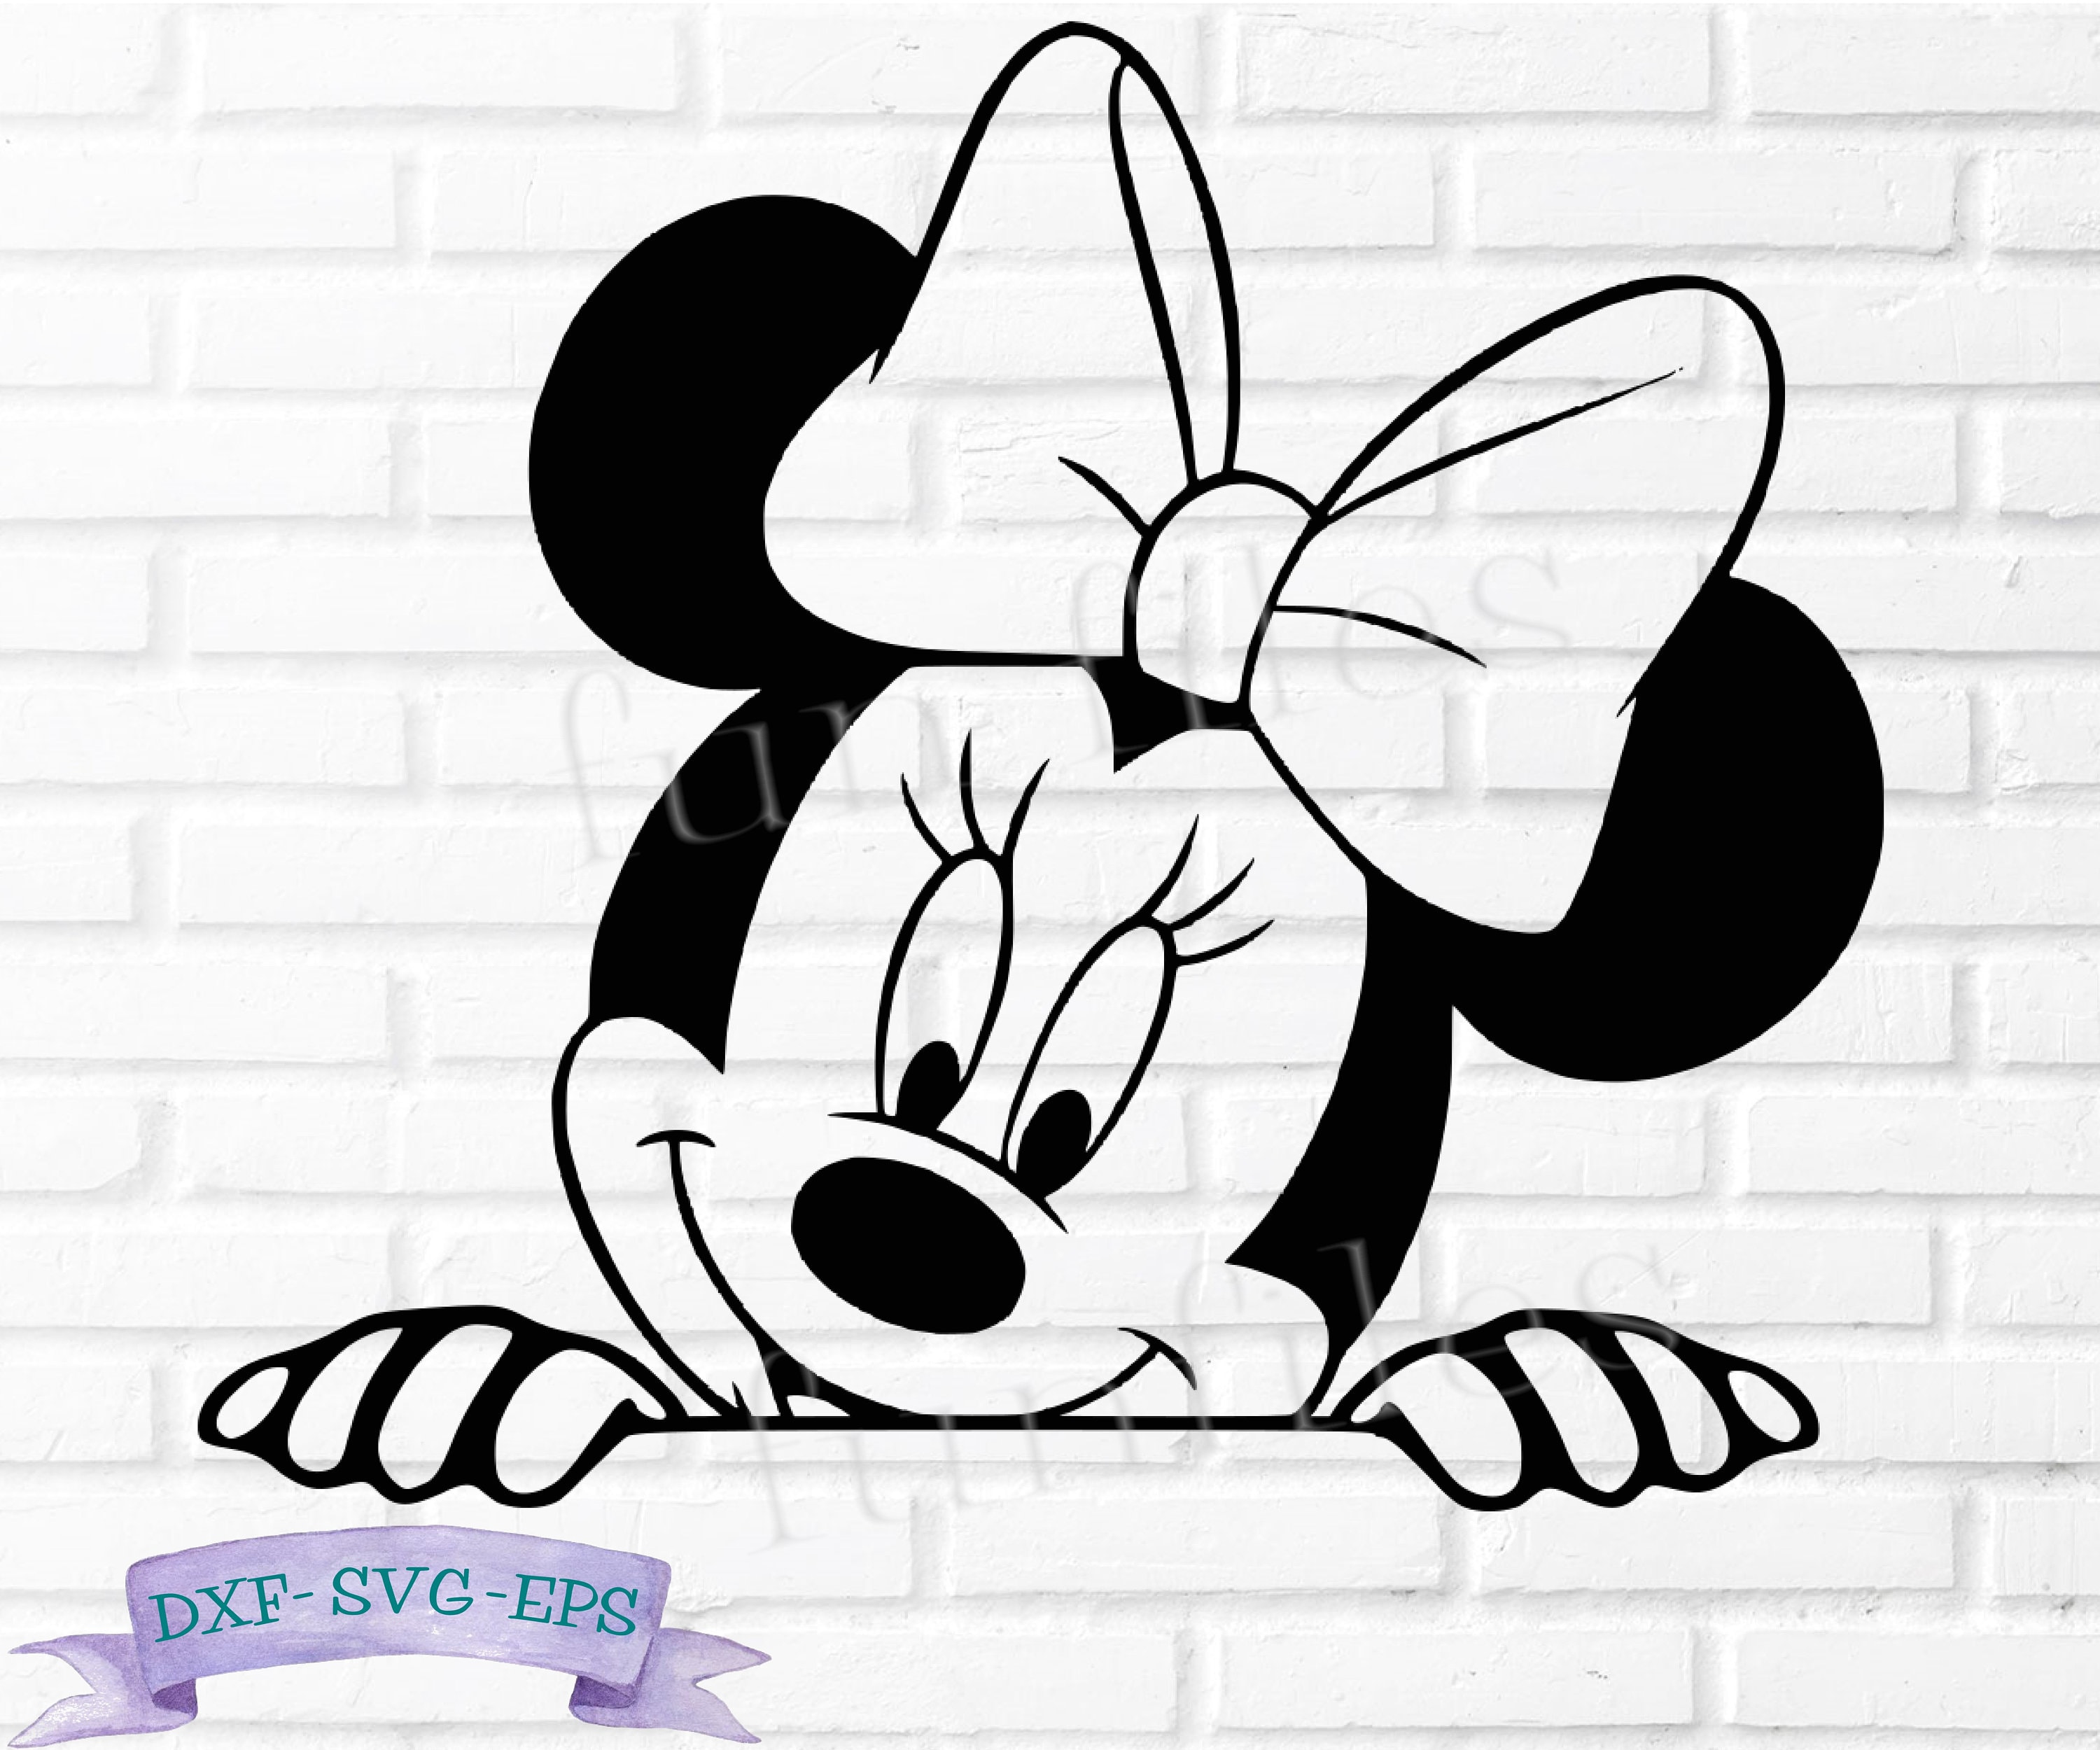 svg Cricut Instant Download dxf Ears Mickey Mouse SVG Minnie Mouse SVG